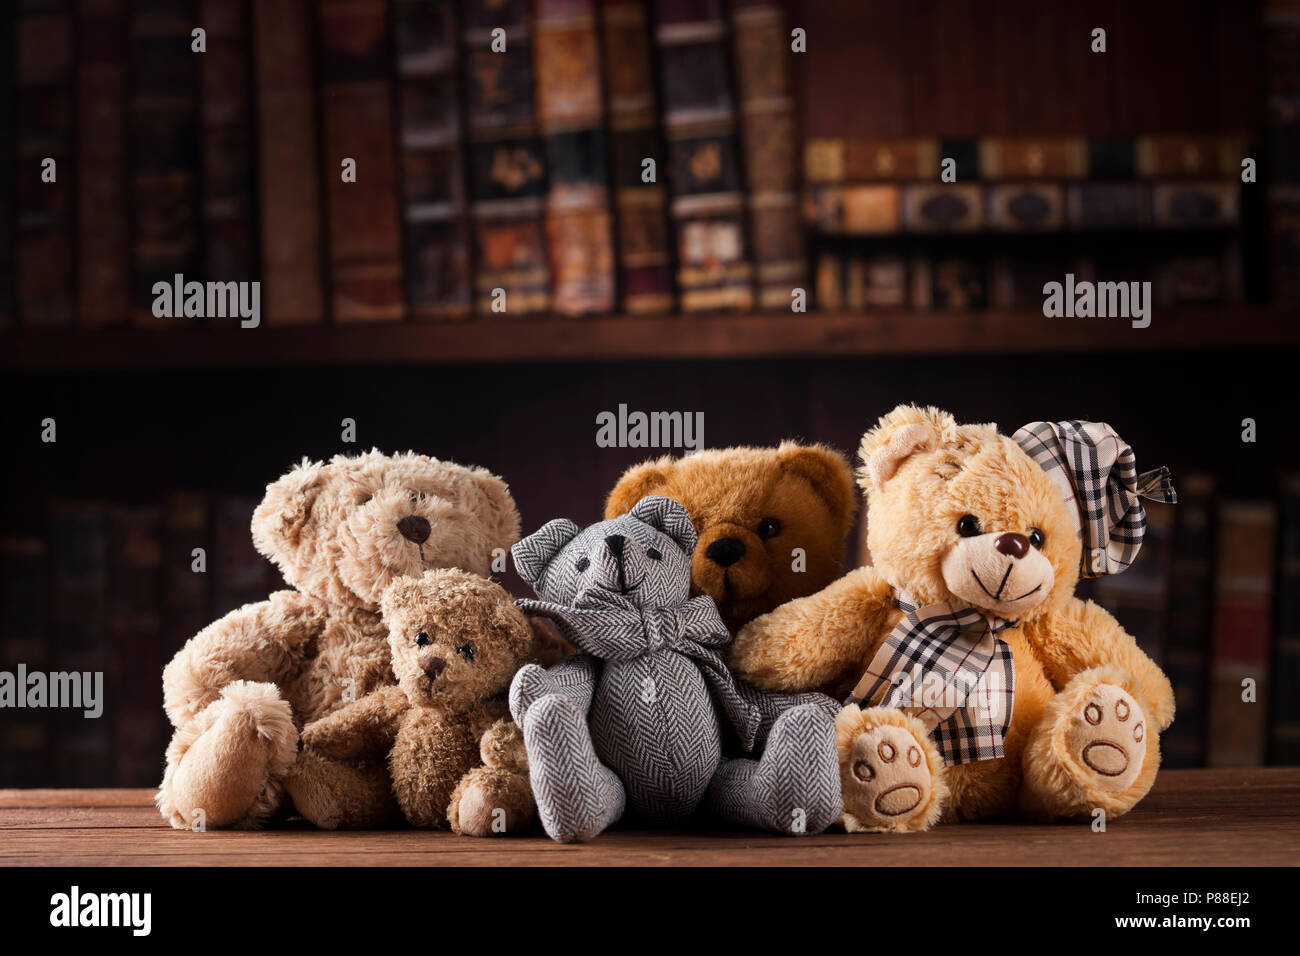 Cute teddy bears with old vintage wood background Stock Photo